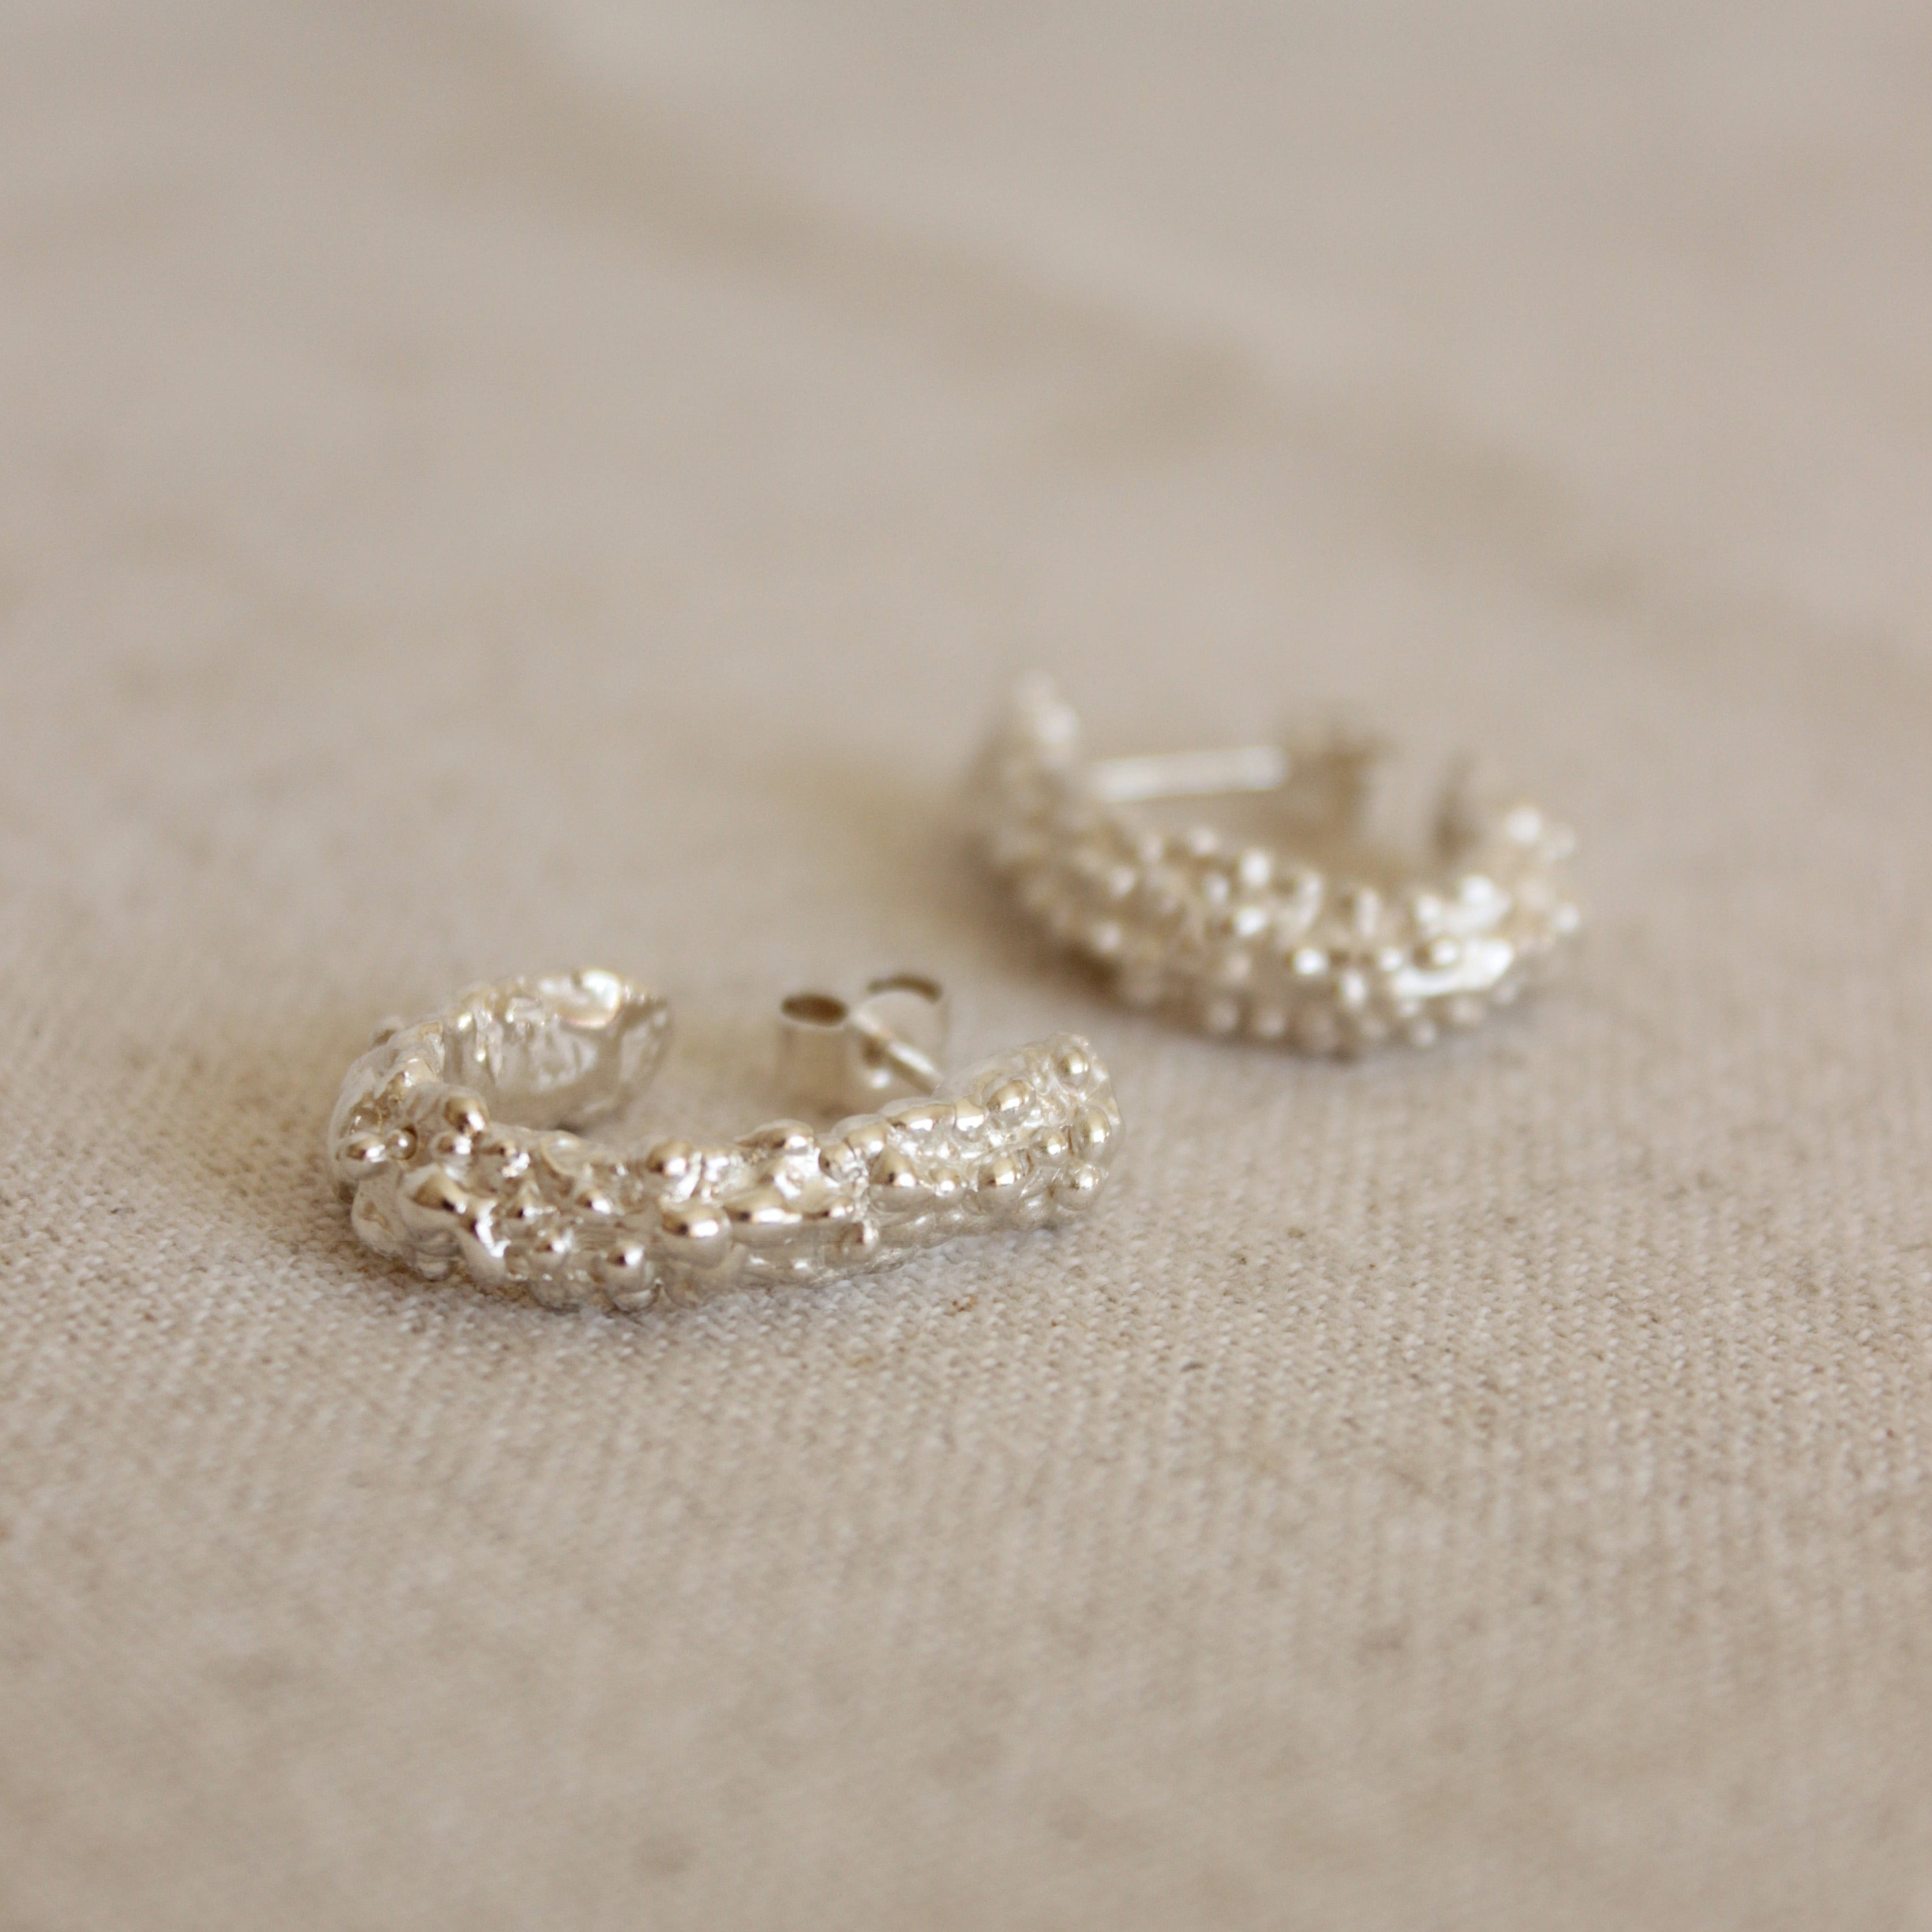 Suki is a Japanese word that means fondness, or love for something. The Suki earrings feature a granulated texture that reflects the light beautifully and acts as a gentle reminder to treat yourself with love a